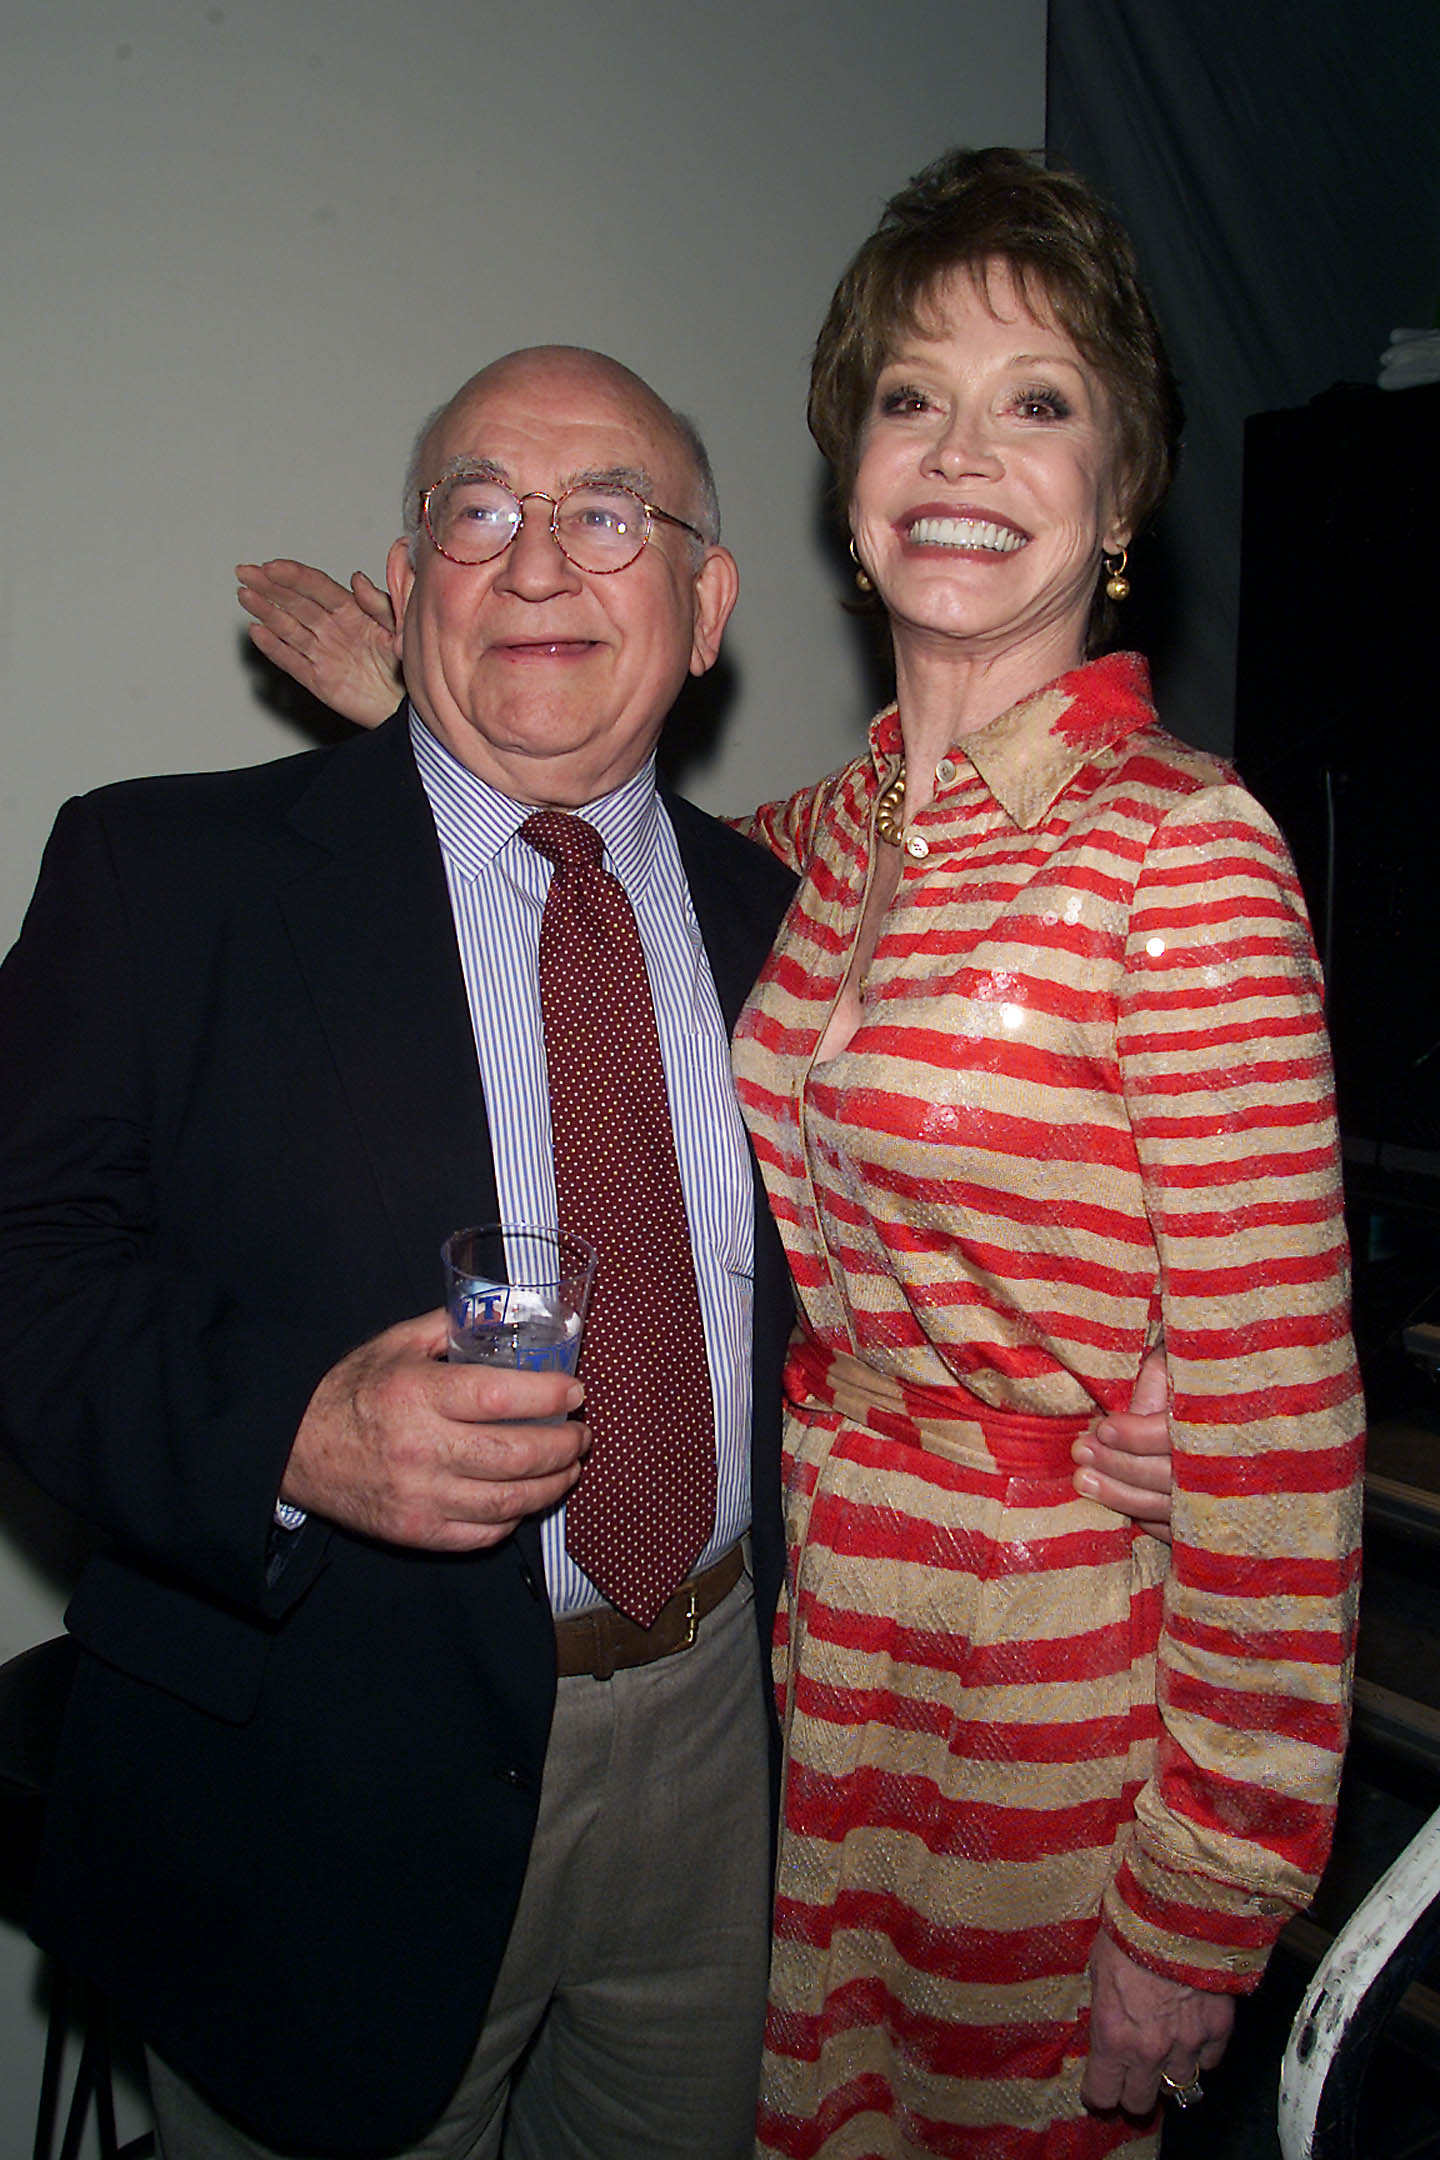 Ed Asner and Mary Tyler Moore at the TV Land fifth anniversary celebration in New York City in 2001. | Photo: Getty Images